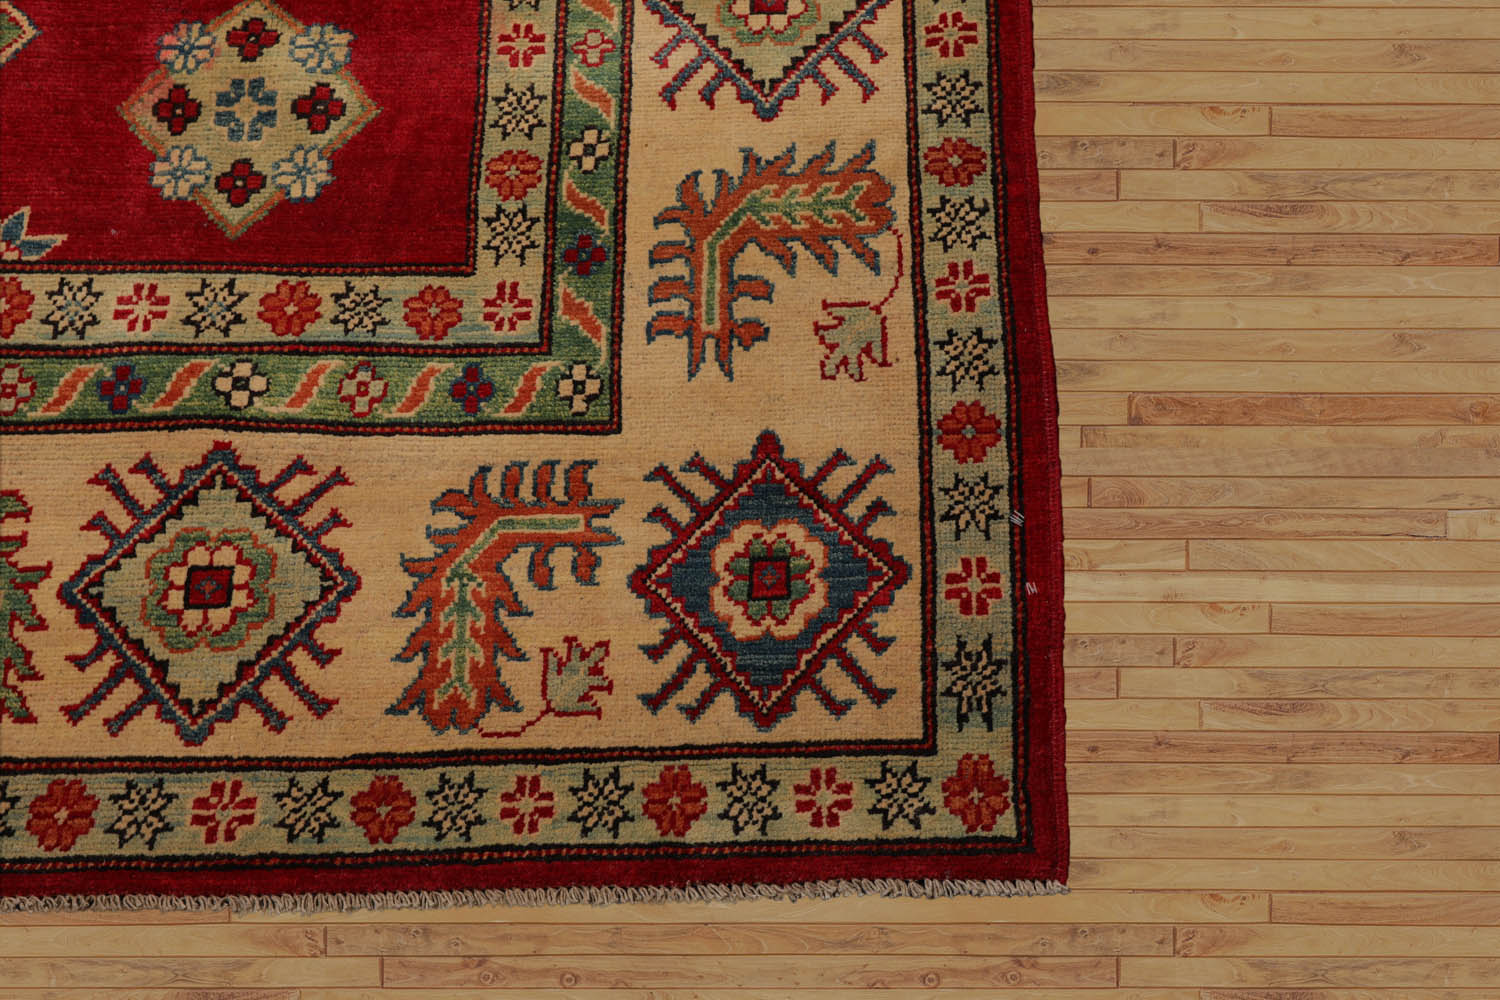 Aubin 9x12 Hand Knotted 100% Wool Kazakh Modern & Contemporary Oriental Area Rug Red, Straw Color